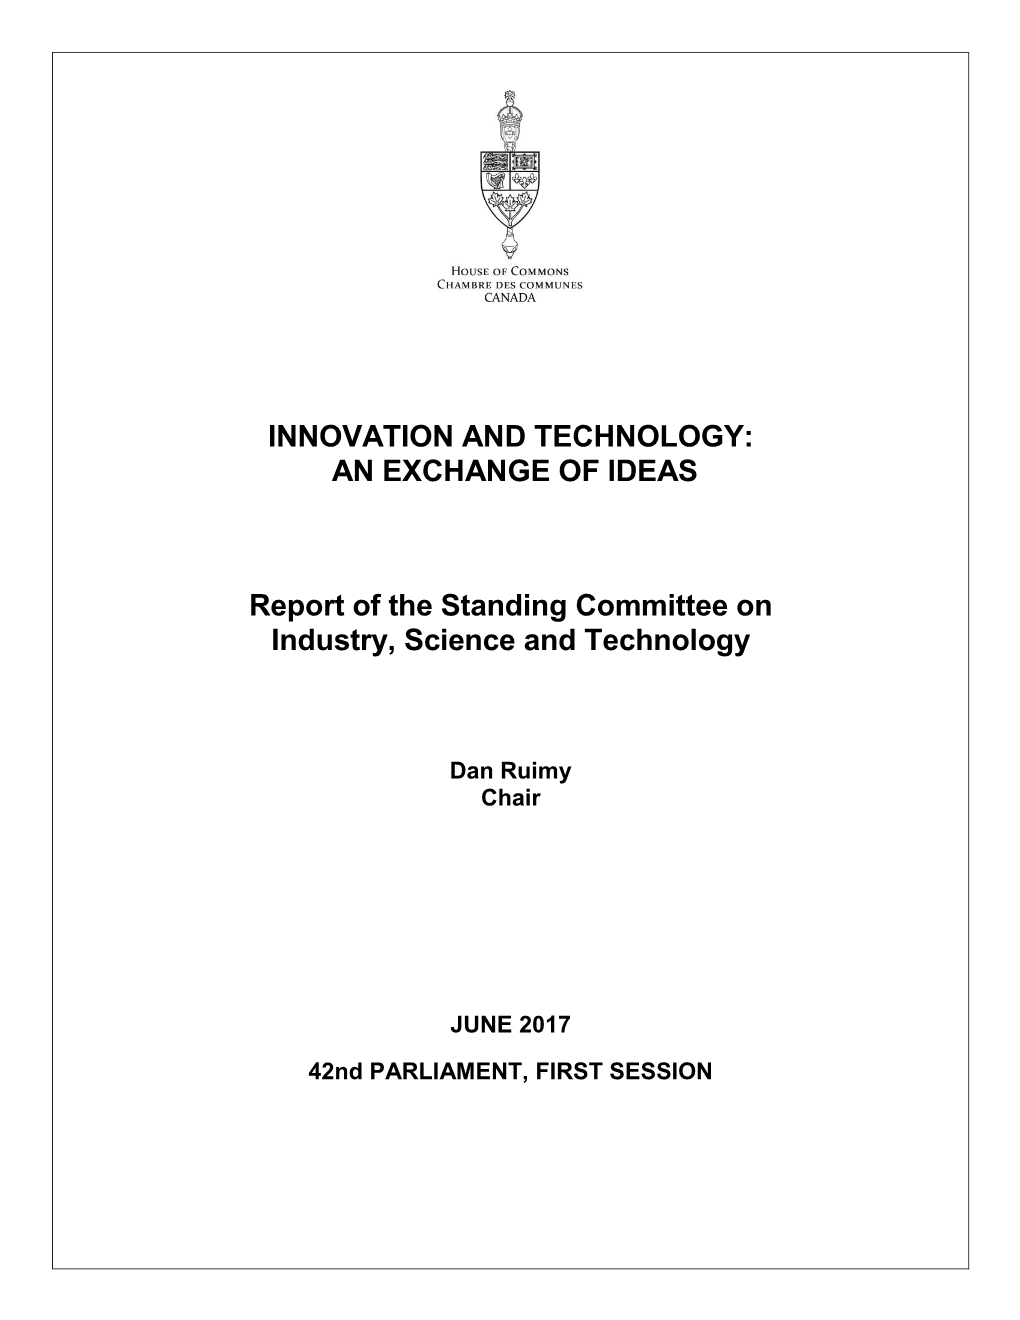 Innovation and Technology: an Exchange of Ideas